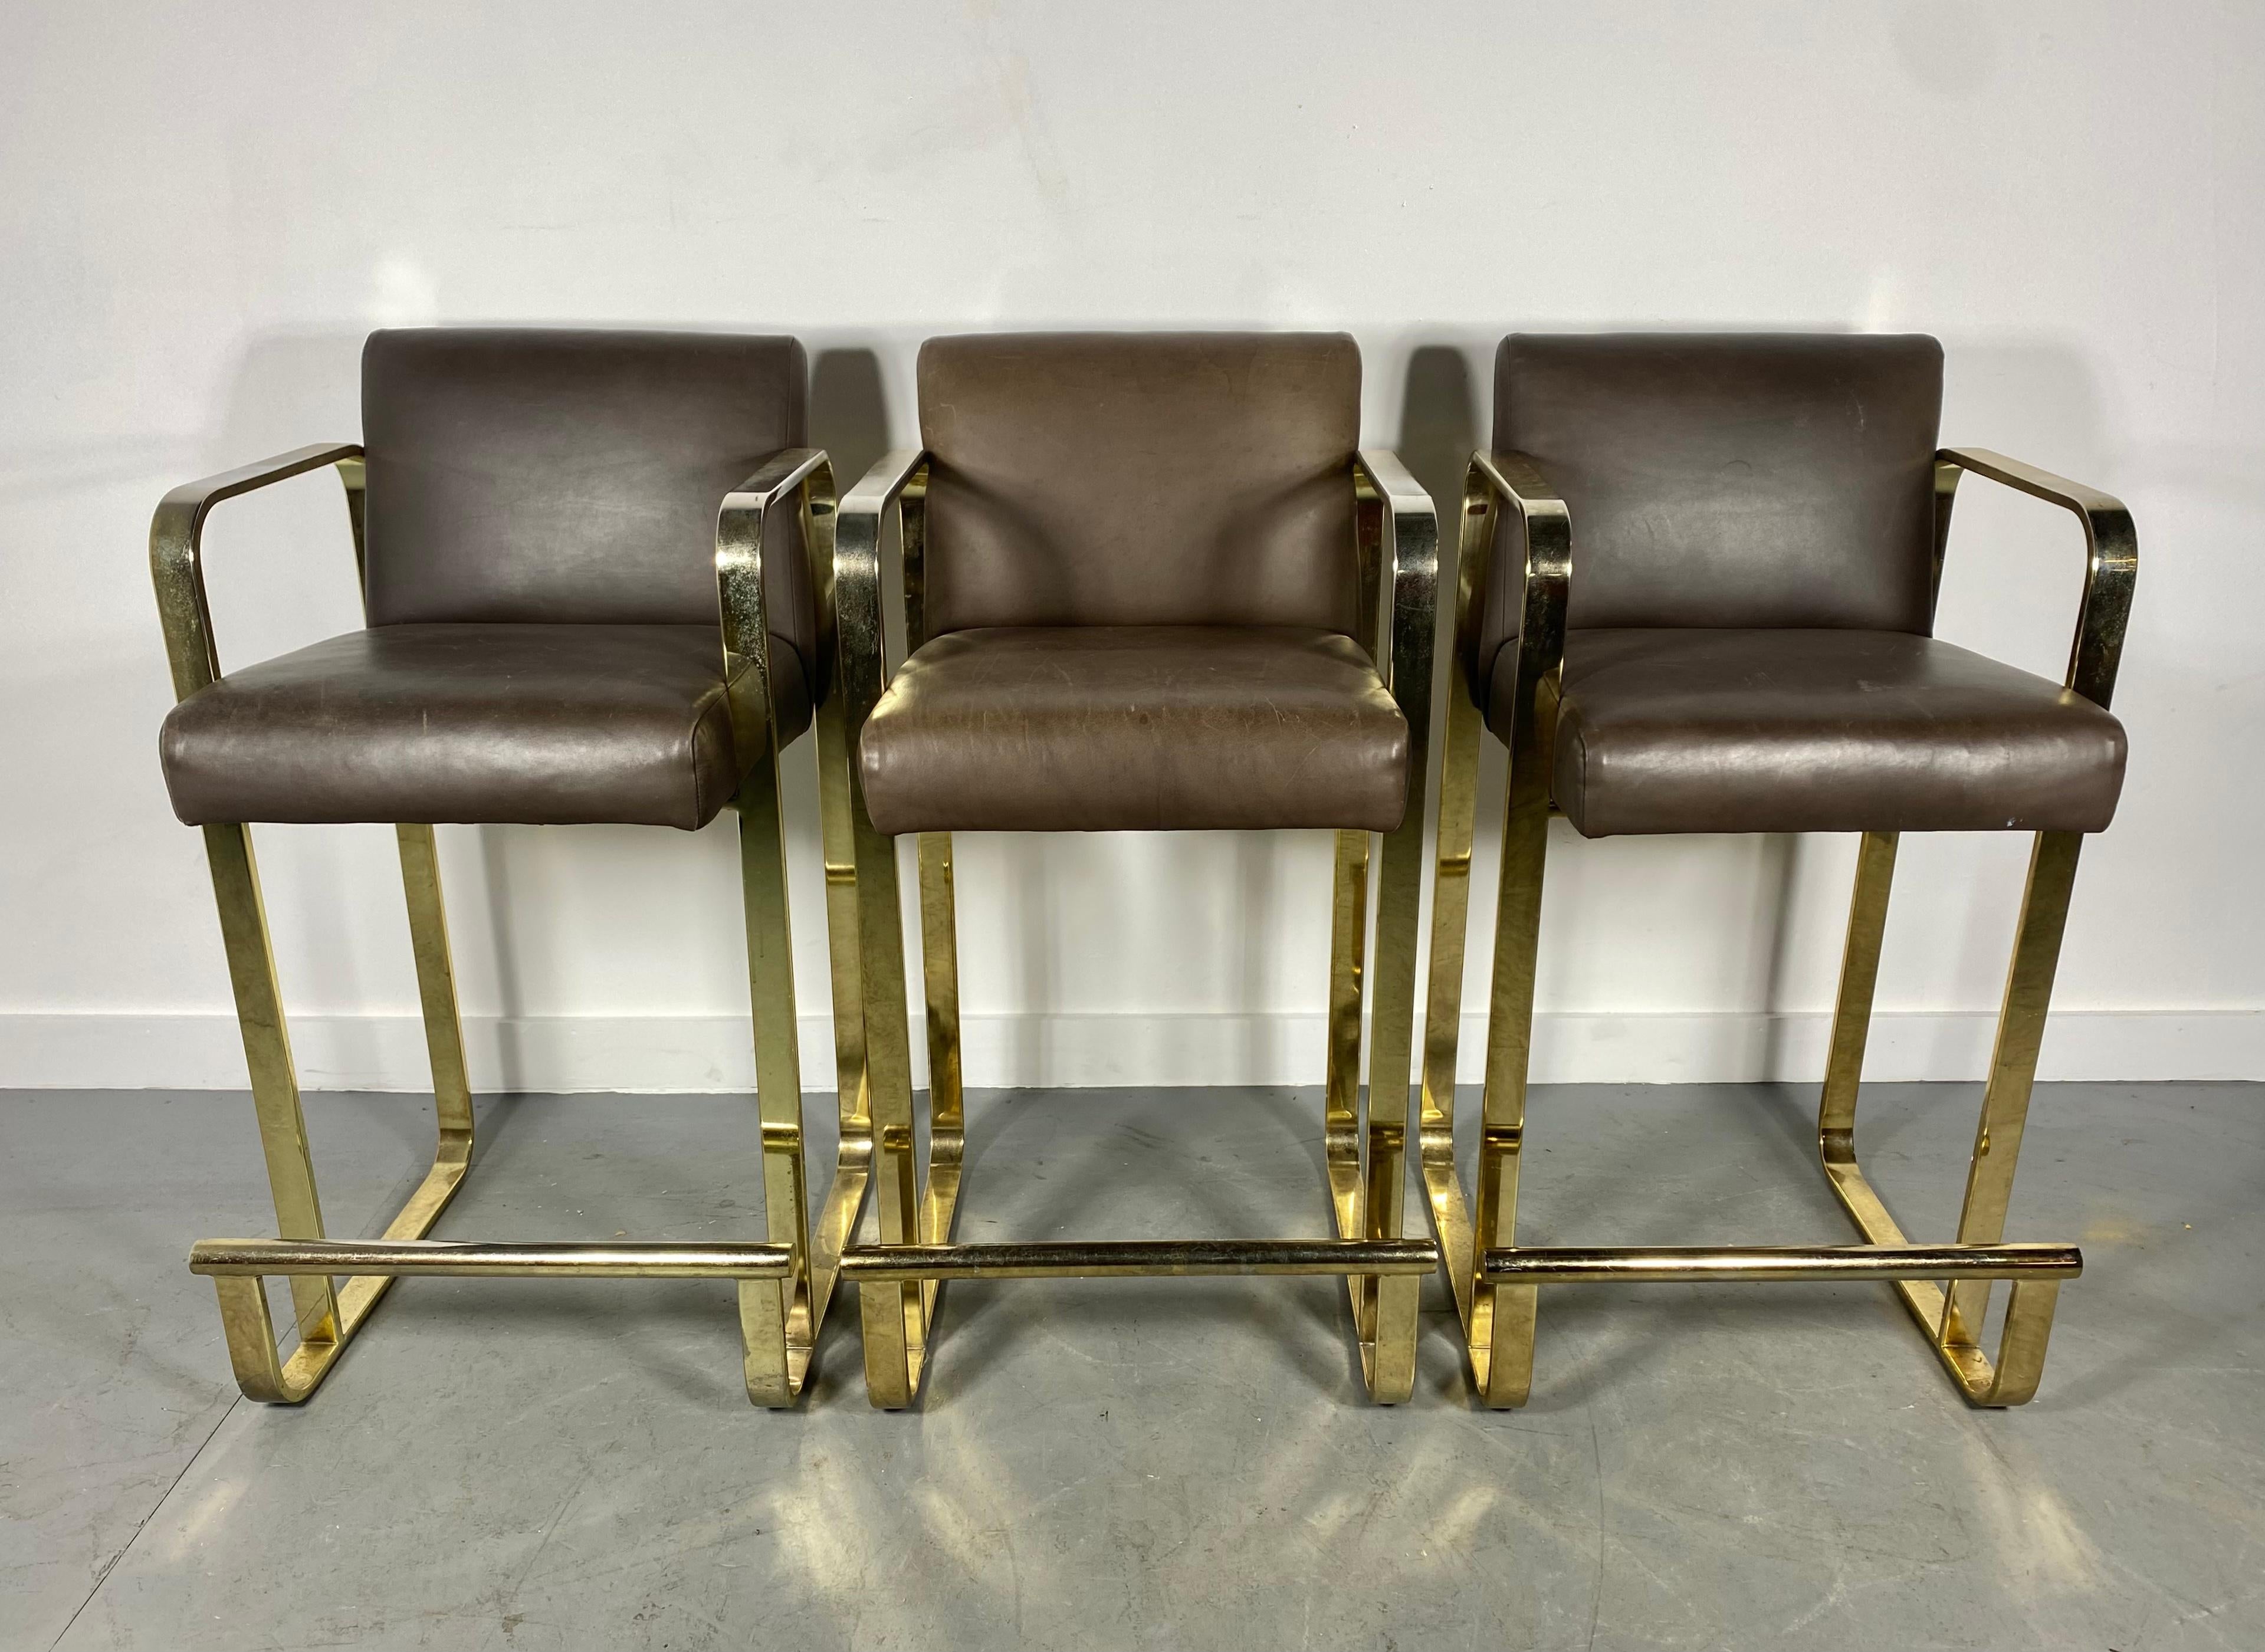 Elegant set of 3 brass (plated) and leather bar / counter stools attributed to Shelby Williams. in the style of Pierre Cardin. Super quality and construction. Nice original condition. Extremely comfortable. Arm height 33